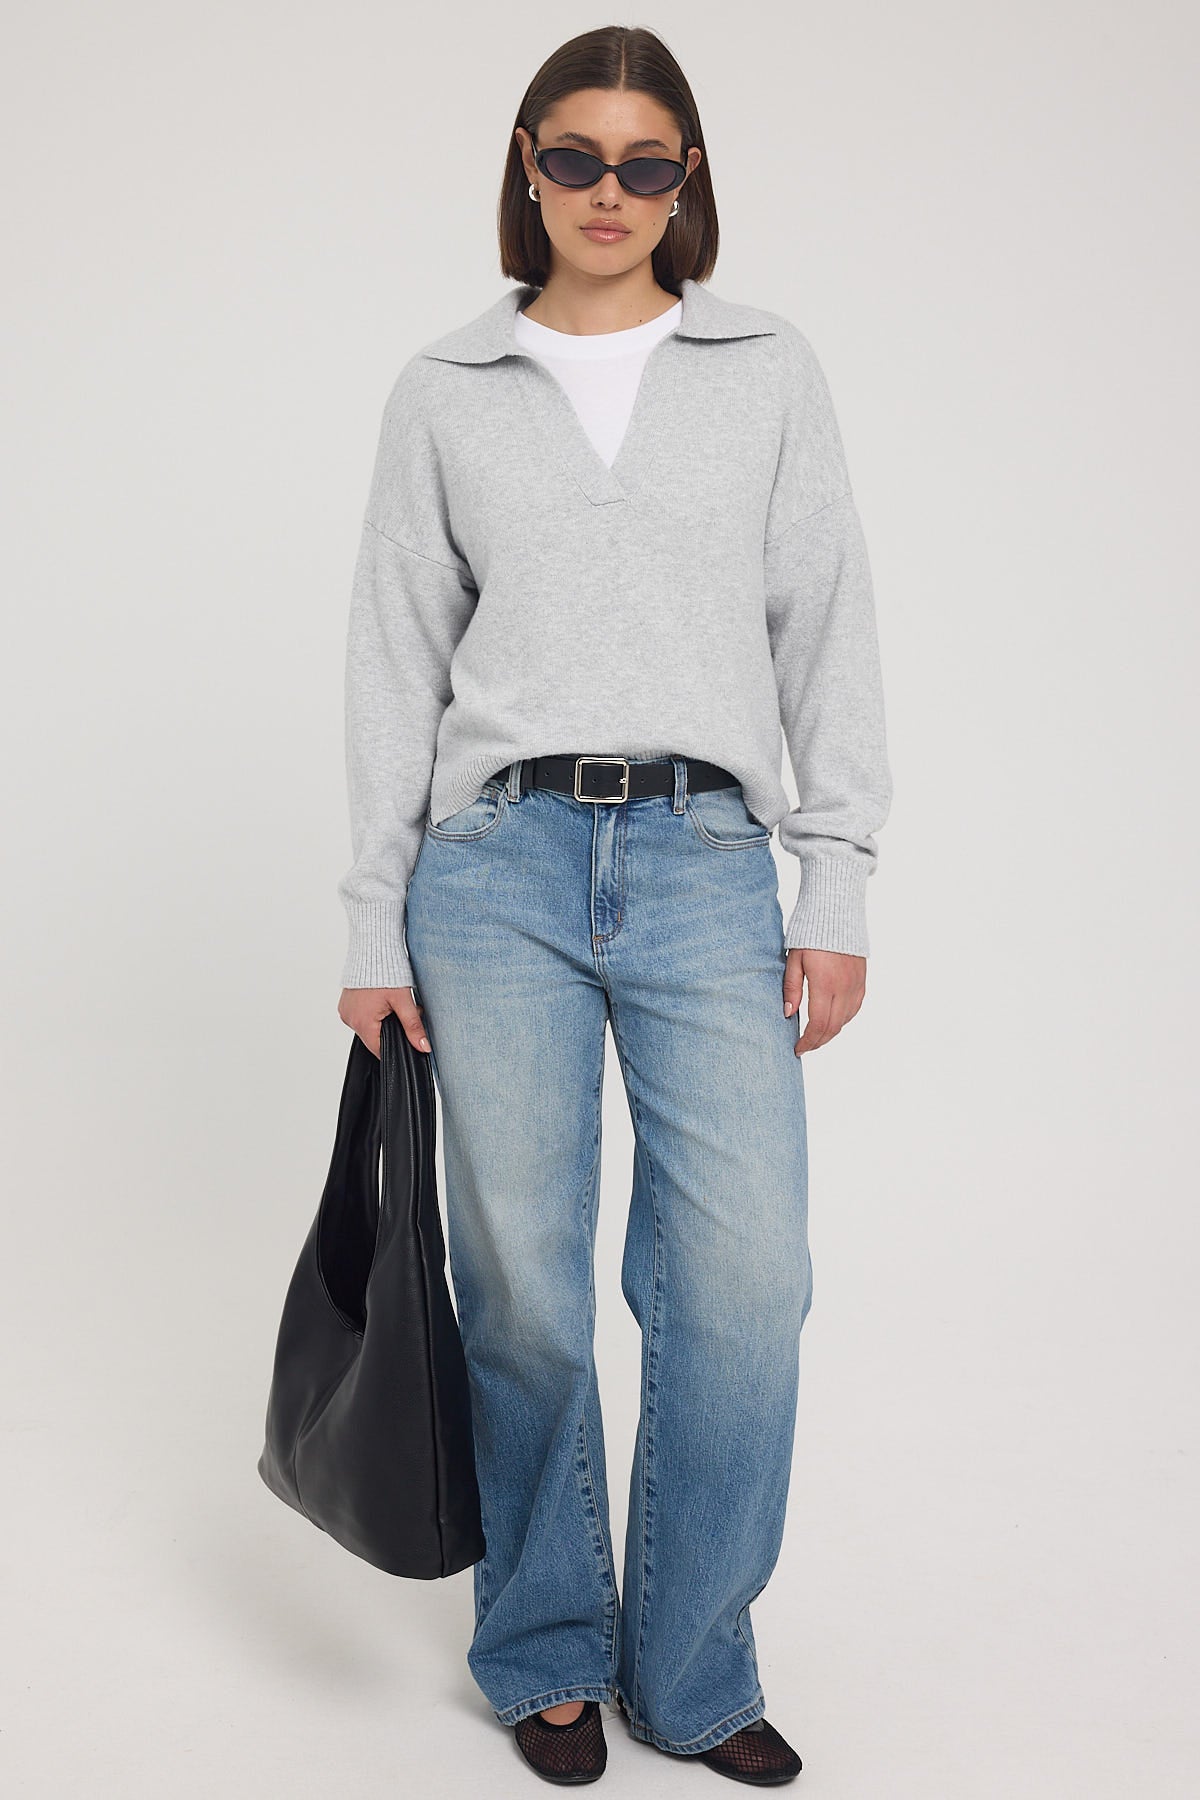 Luck & Trouble Thea Open Collar Knit Jumper Grey